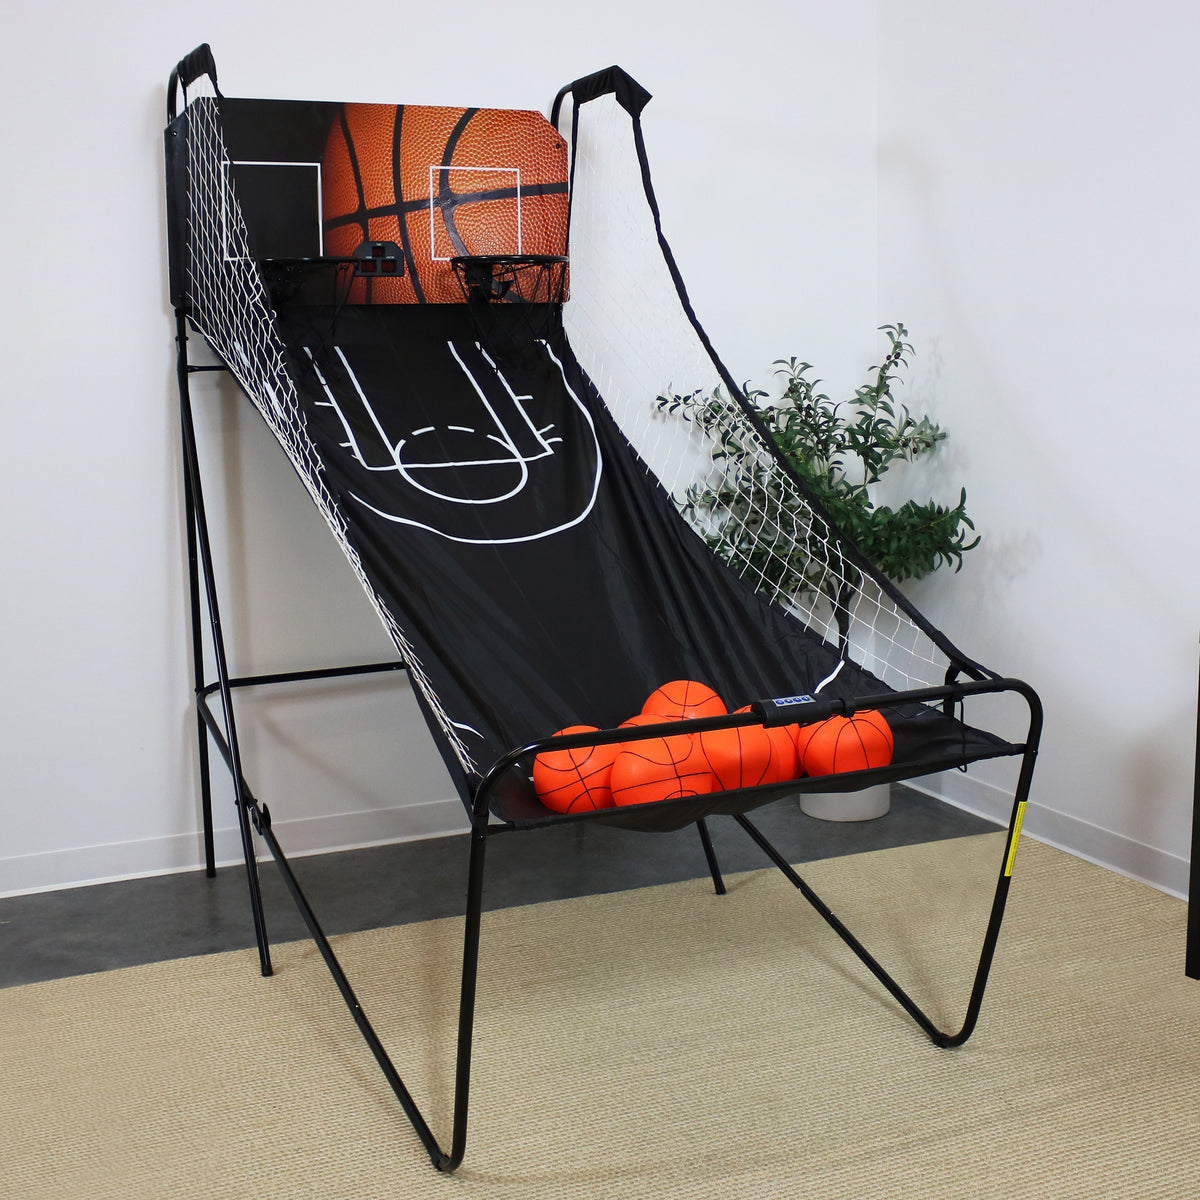 Lancaster Gaming Company Electric Indoor Basketball Game in the